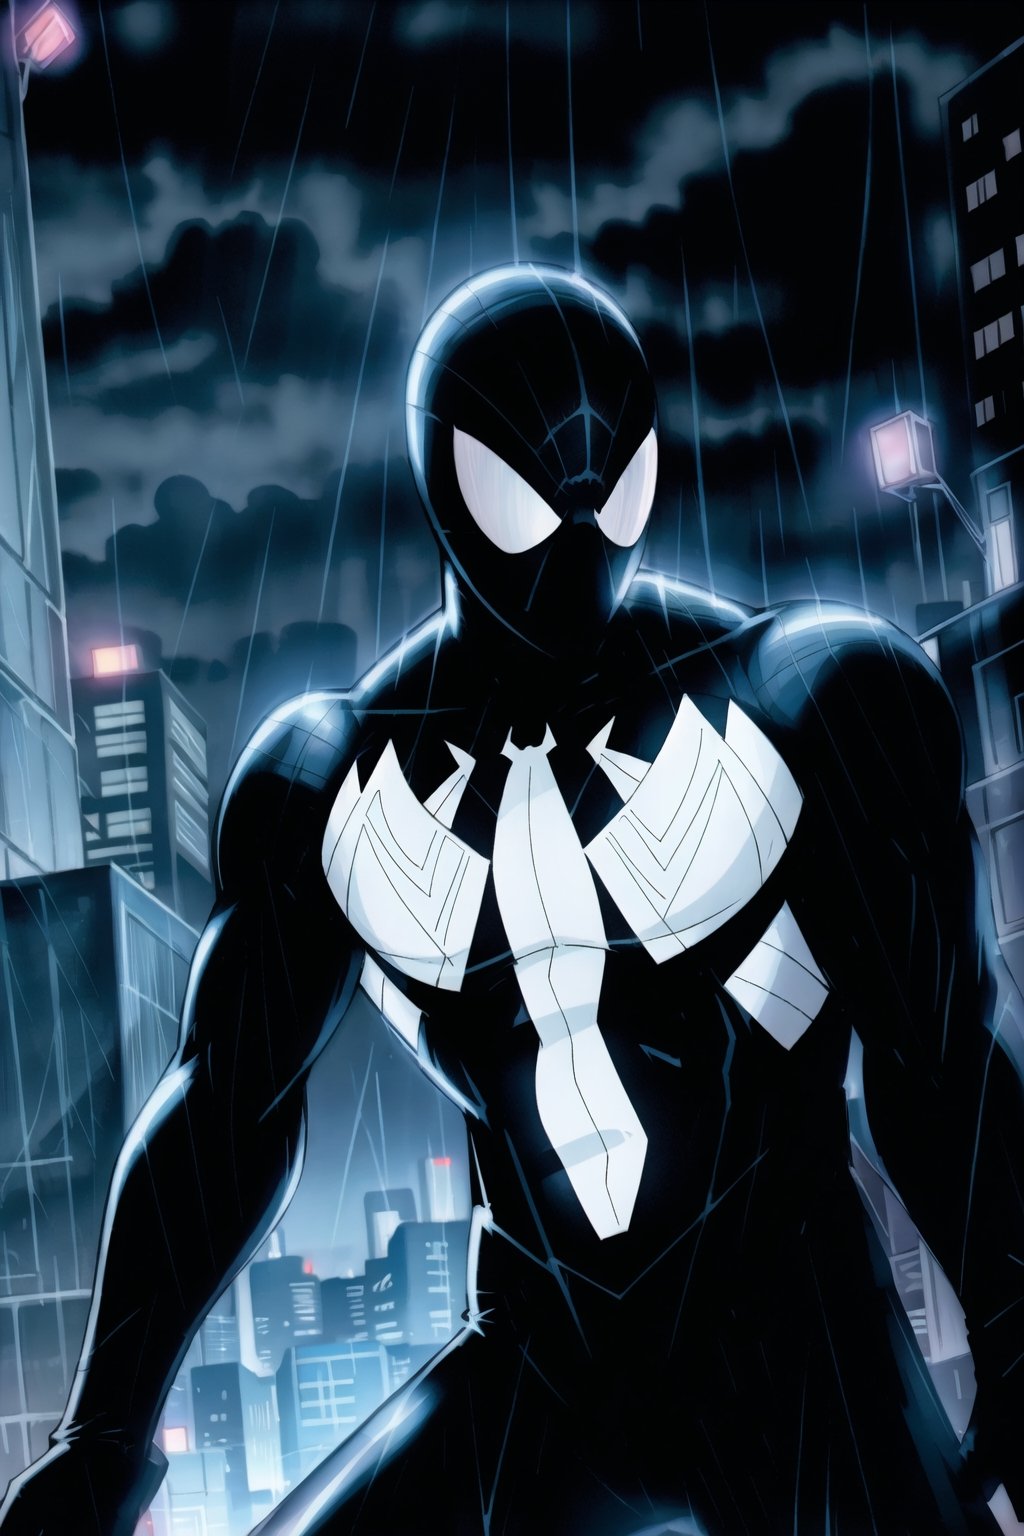 BlackSM headshot, action shot, dramatic, city background at night, rainy and stormy weather, symmetrical mask, hyper detailed, photorealistic, gothic, black, Spiderman, ultra detailed arms, perfect hands, good lighting